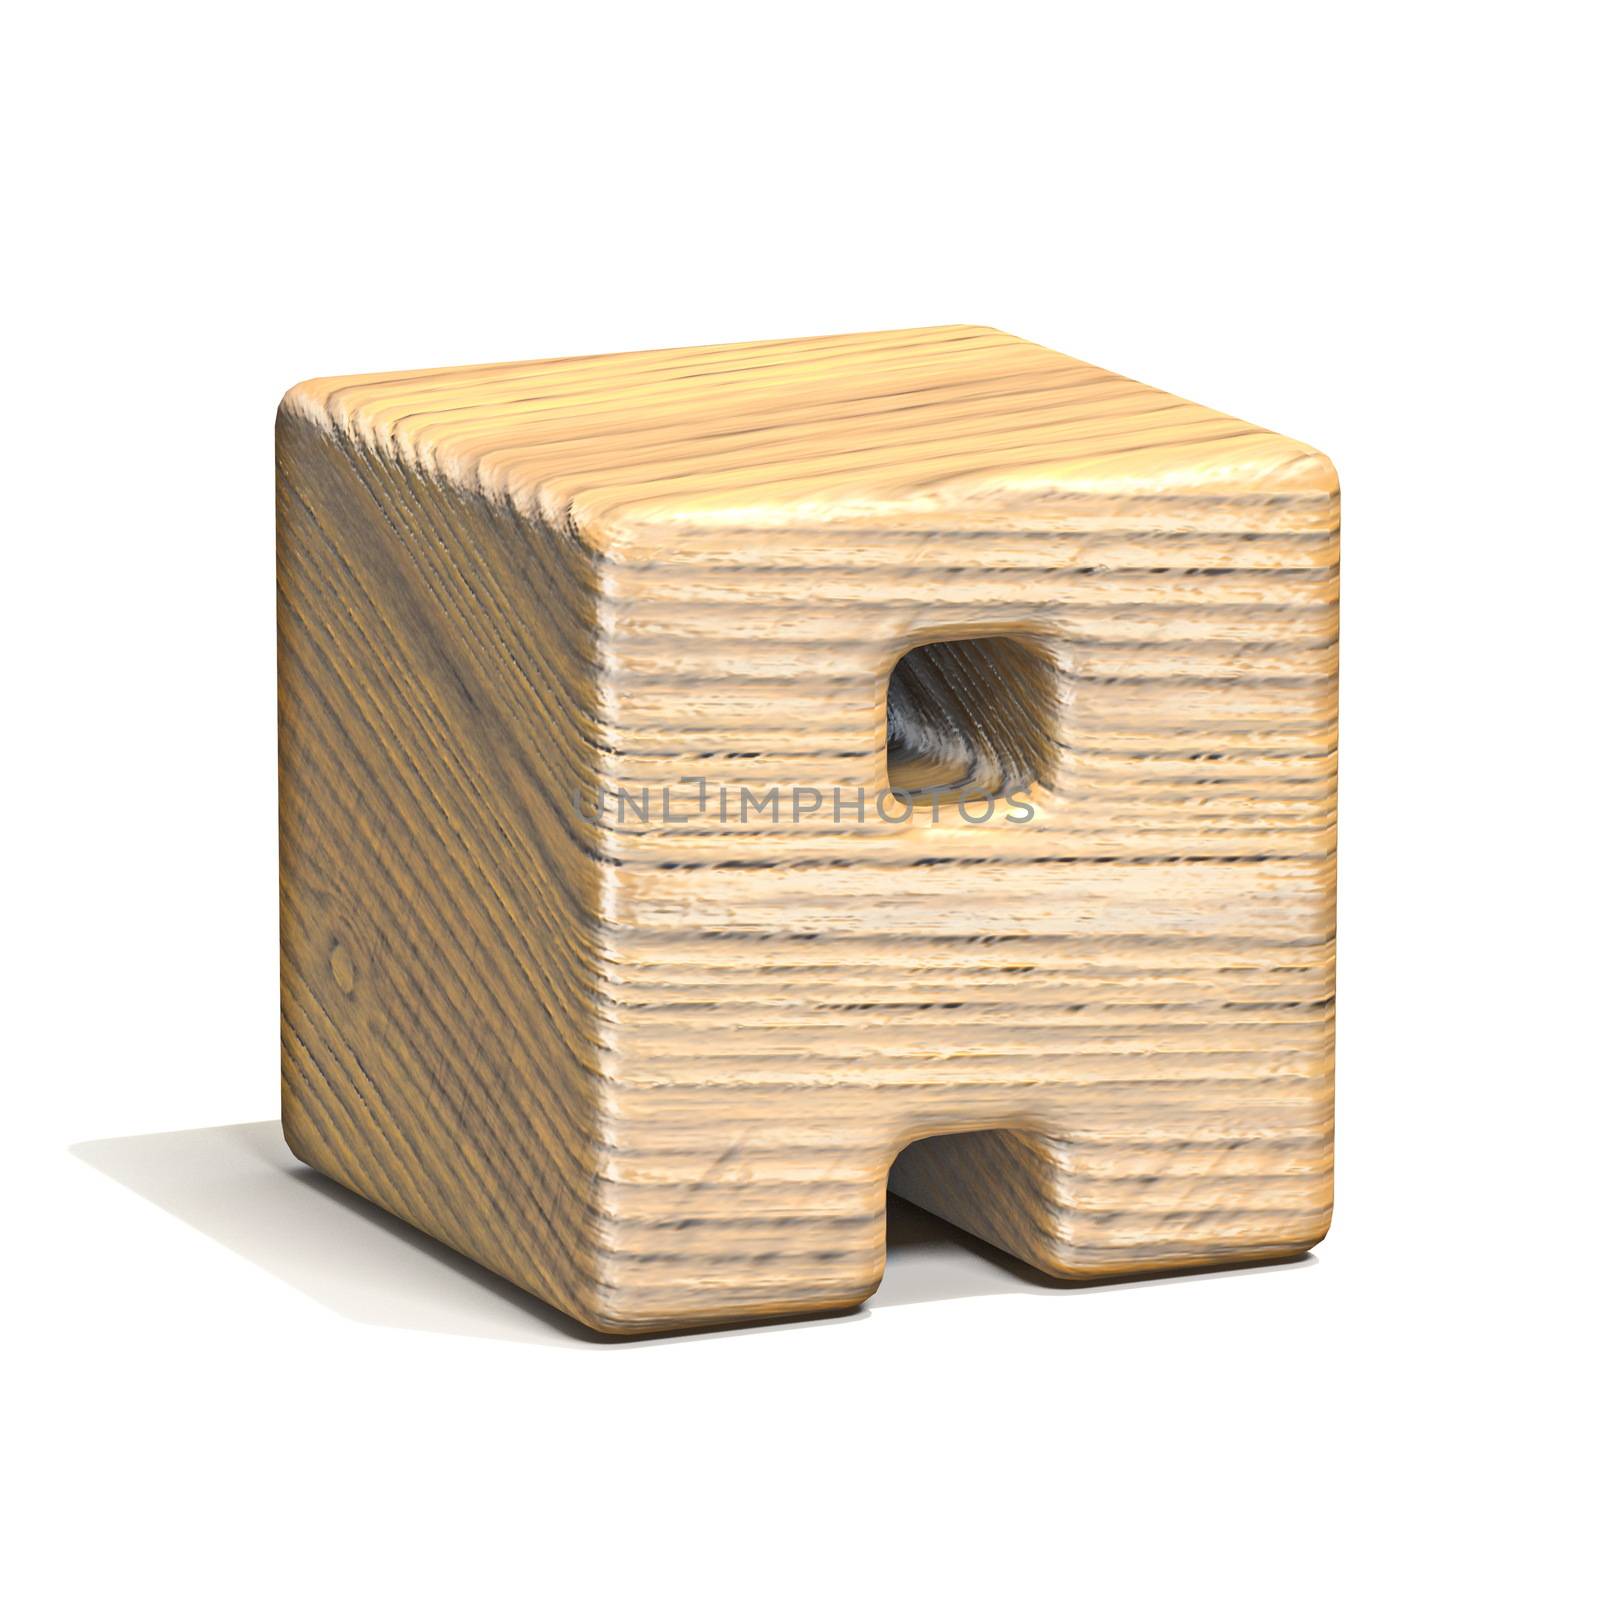 Solid wooden cube font Letter A 3D by djmilic